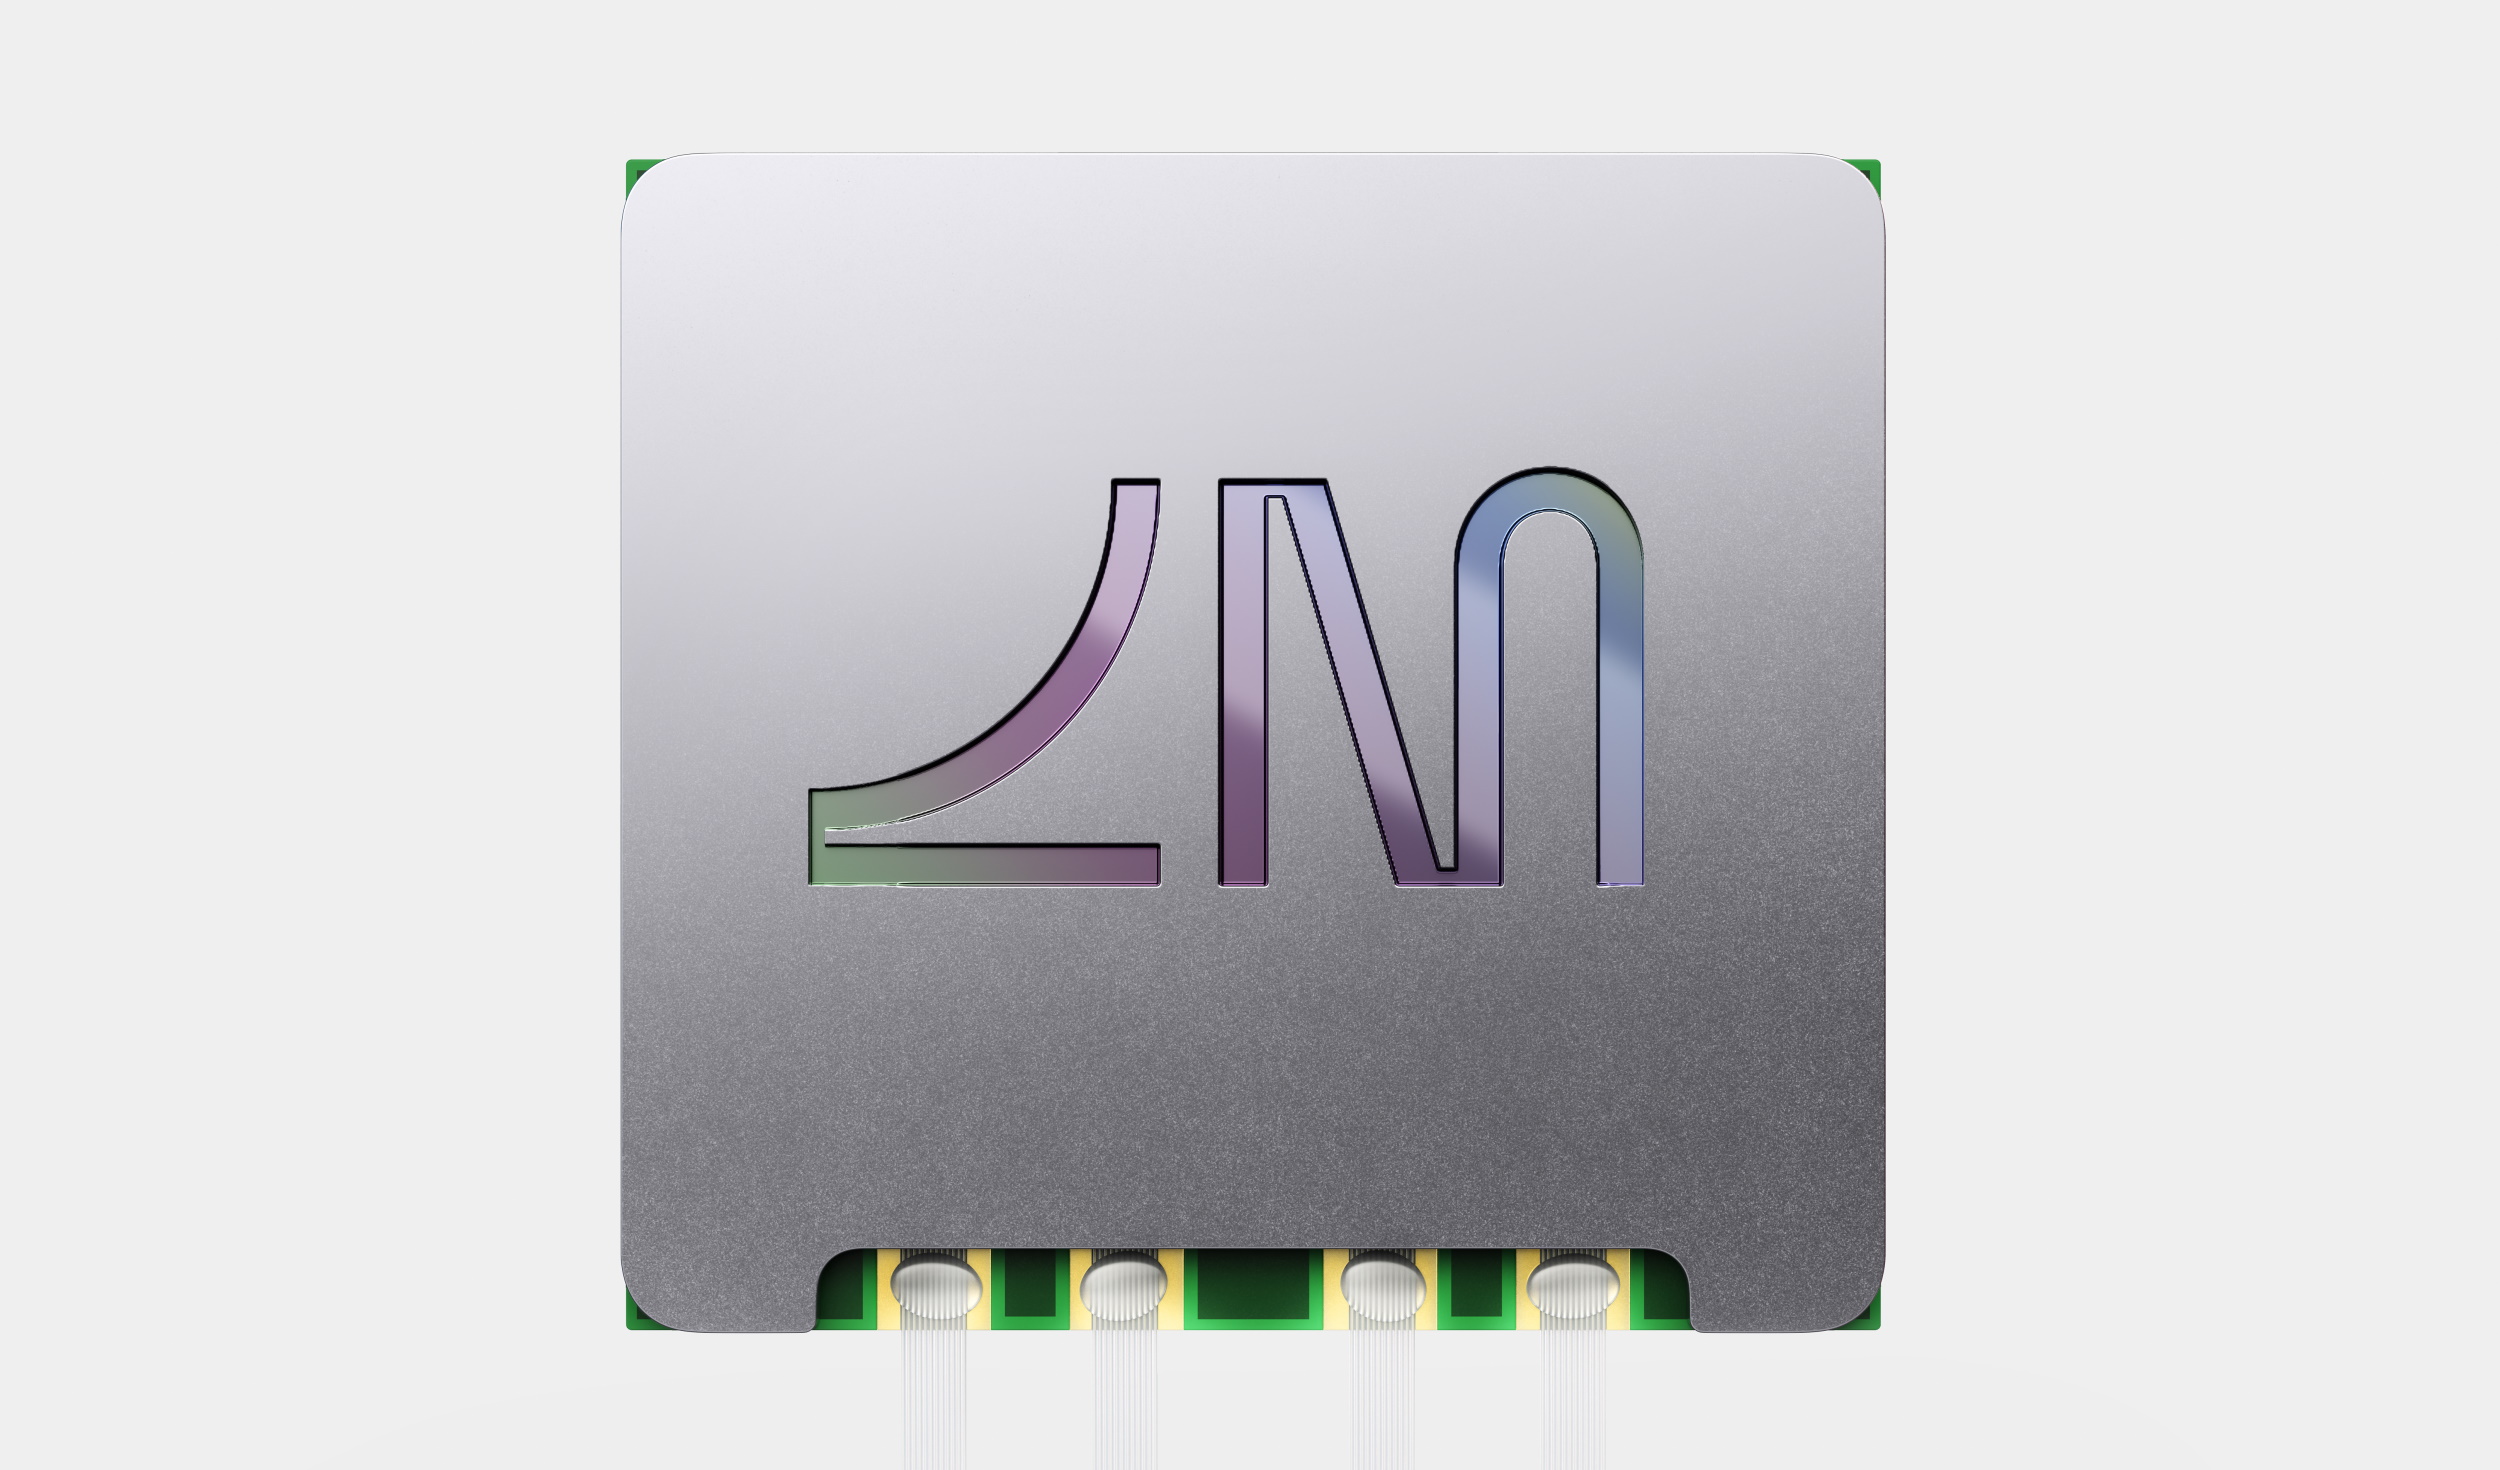 A Lightmatter chip with its logo on the side.